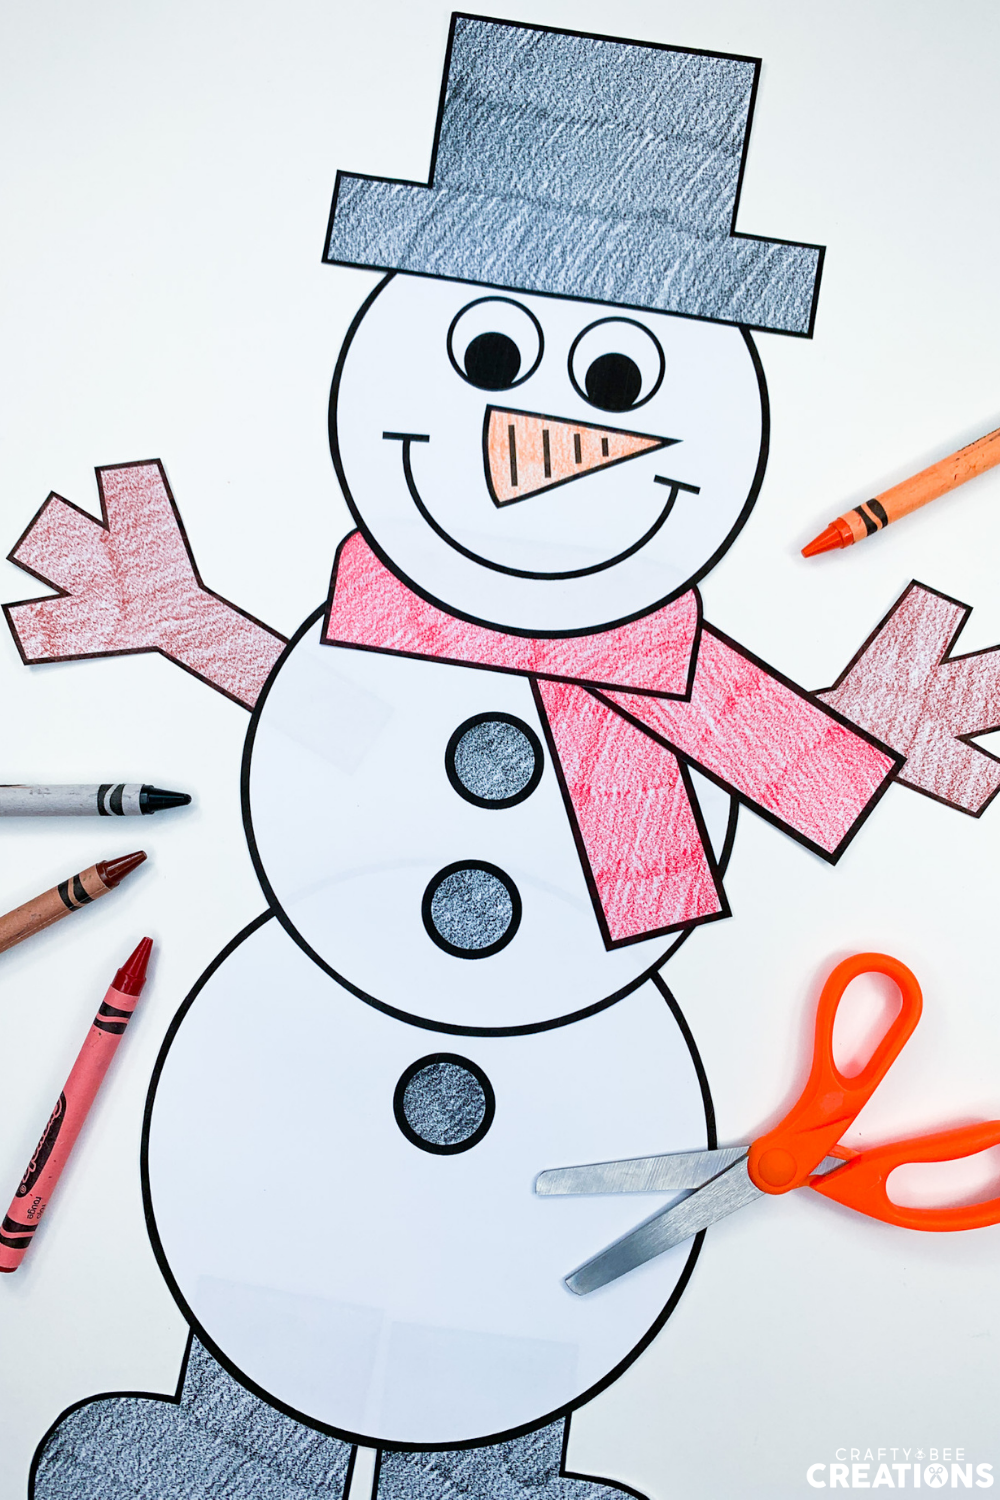 This snowman craft has been colored by a student. The scarf is red and the buttons are black. There are orange scissors as well as black, brown and red crayons lying nearby.